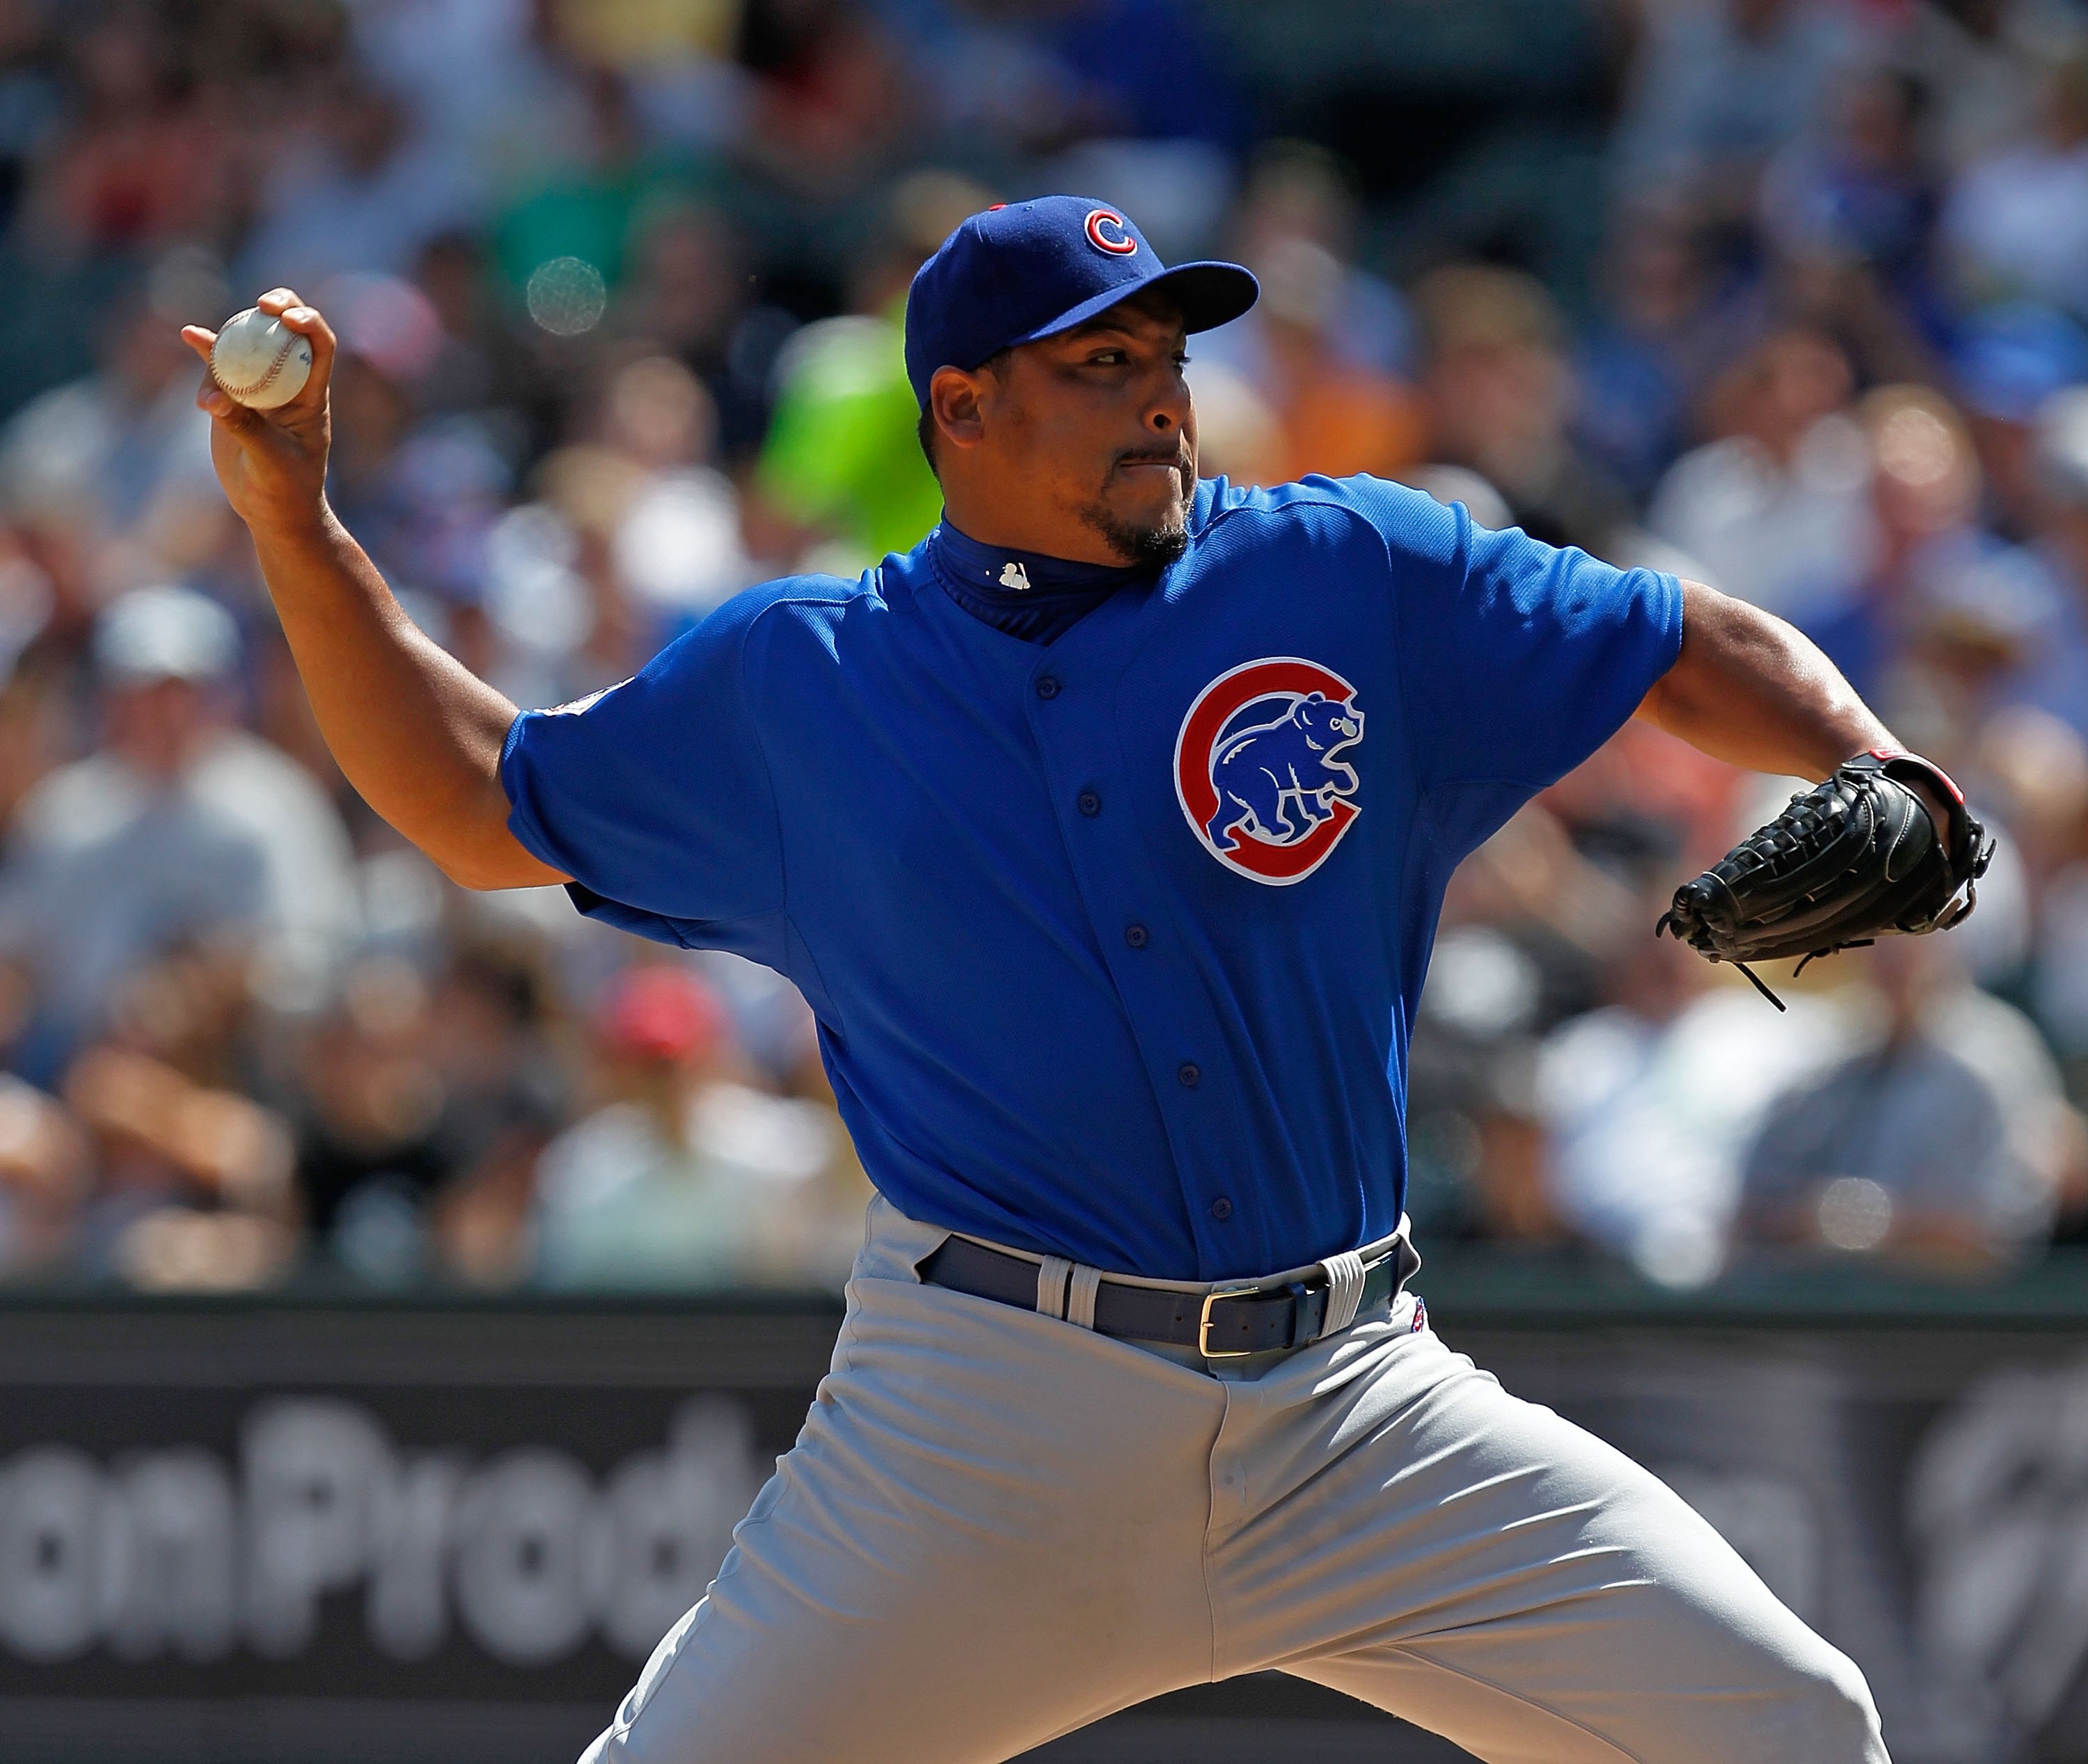 CHICAGO - JUNE 25: Starting pitcher Carlos Zambrano #38 of the Chicago Cubs throws the ball in the 1st inning against the Chicago White Sox at U.S. Cellular Field on June 25, 2010 in Chicago, Illinois. Zambrano was suspended indefinitely by the Cubs for a